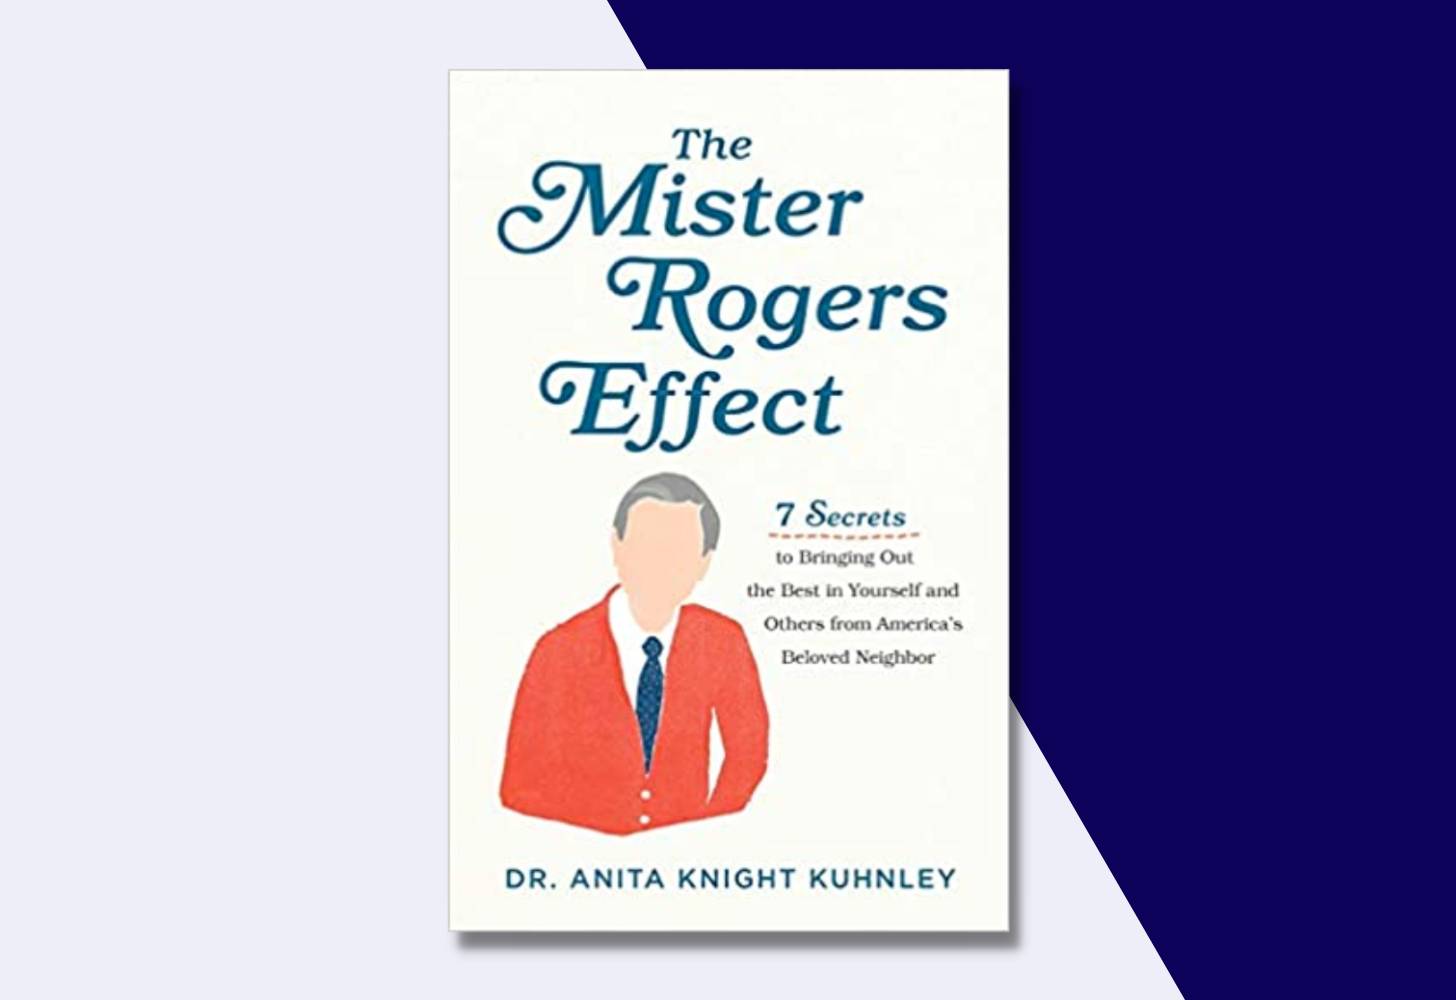 “The Mister Rogers Effect: 7 Secrets to Bringing Out the Best in Yourself and Others from America’s Beloved Neighbor” by Dr. Anita Knight Kuhnley